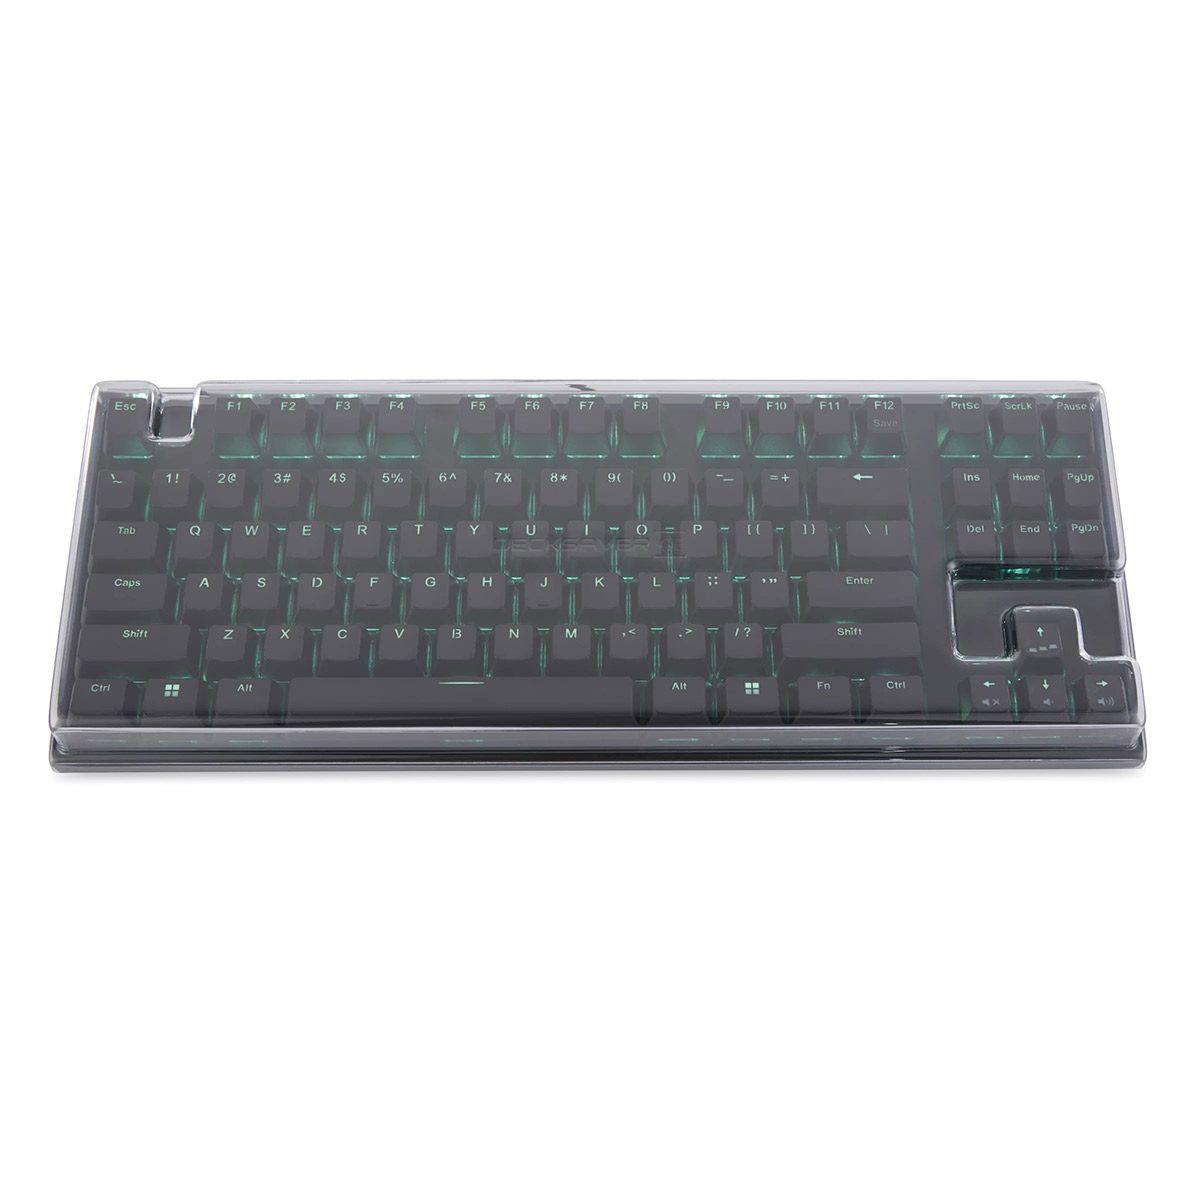 DECKSAVER deck saver [ Realforce GX1 ] for machinery protective cover DSGE-PC-GX1